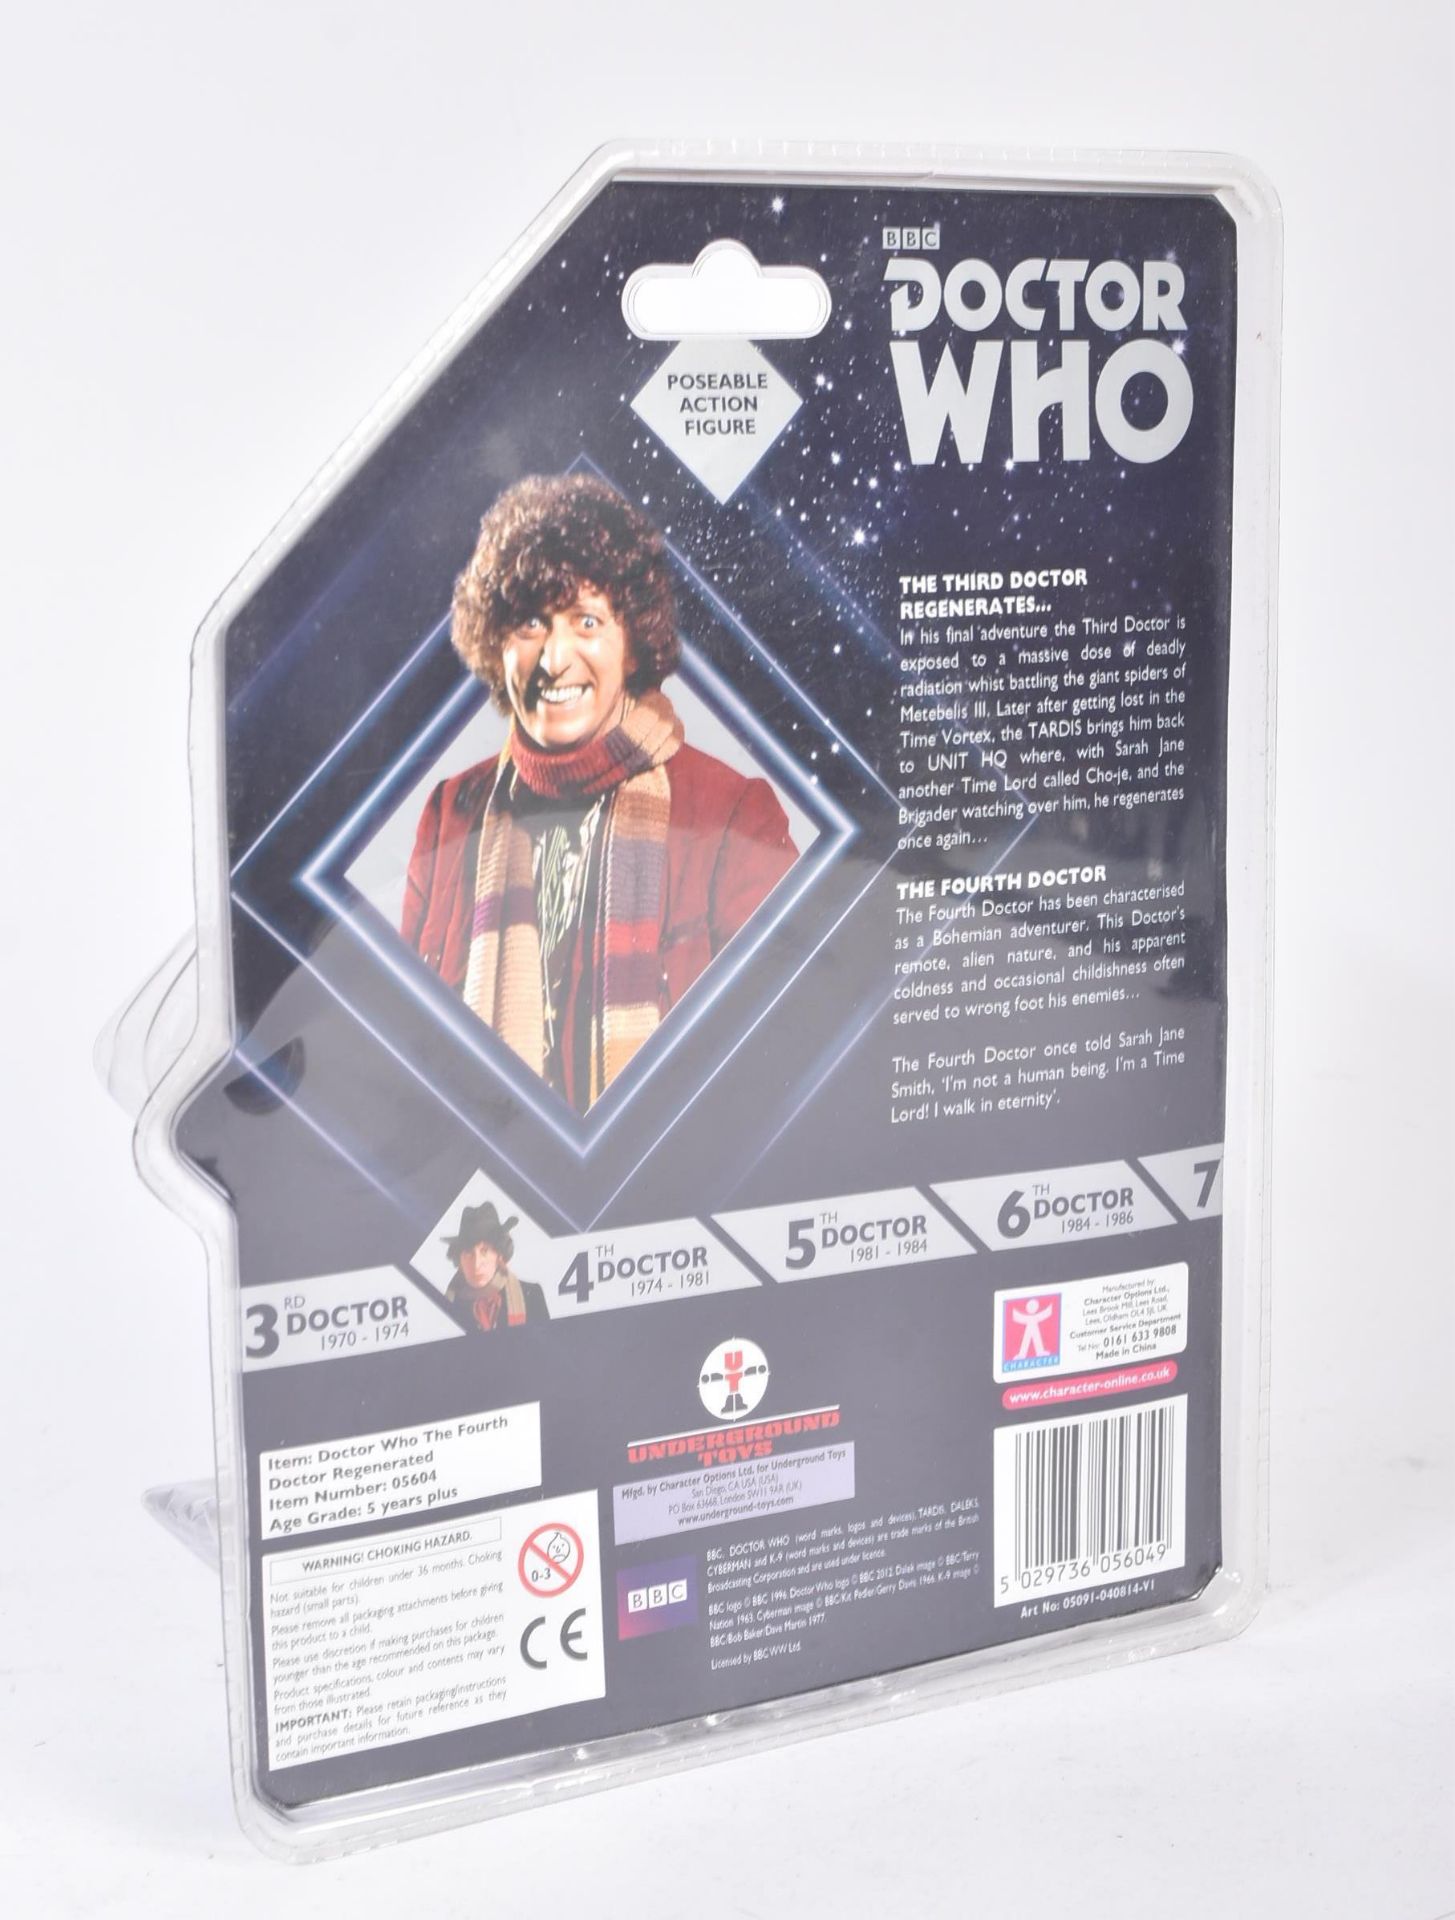 DOCTOR WHO - UNDERGROUND TOYS - TOM BAKER AUTOGRAPHED FIGURE - Image 3 of 4